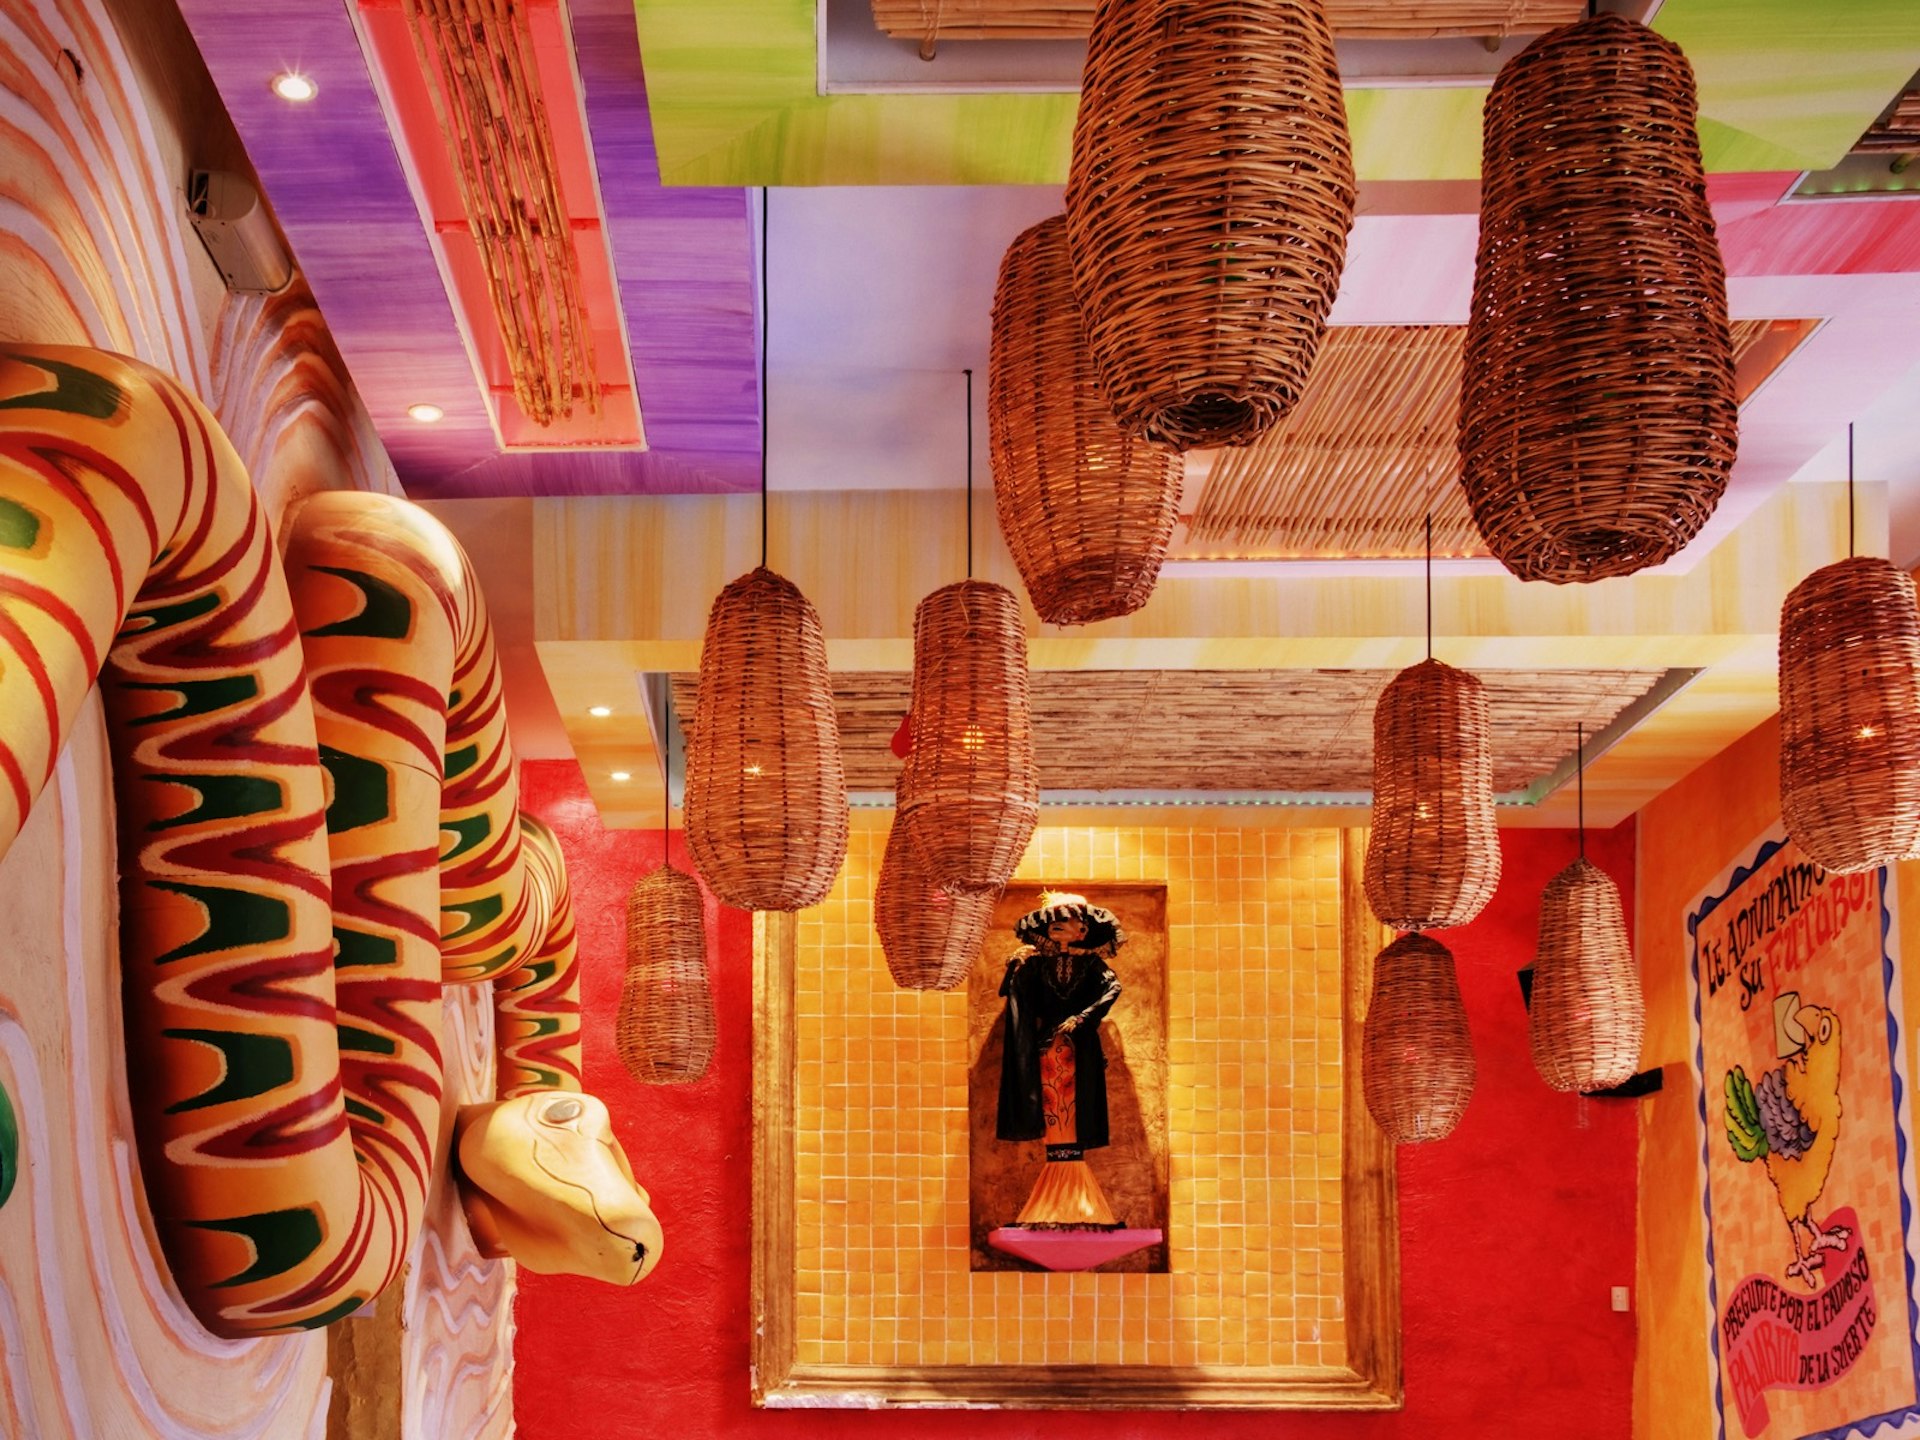 A painted wooden snake is affixed to the left wall while the back wall houses an image of a person in traditional dress the right wall has an image of a snake and woven baskets hang from the ceiling being used as lamps. It is painted purple, green, red and orange